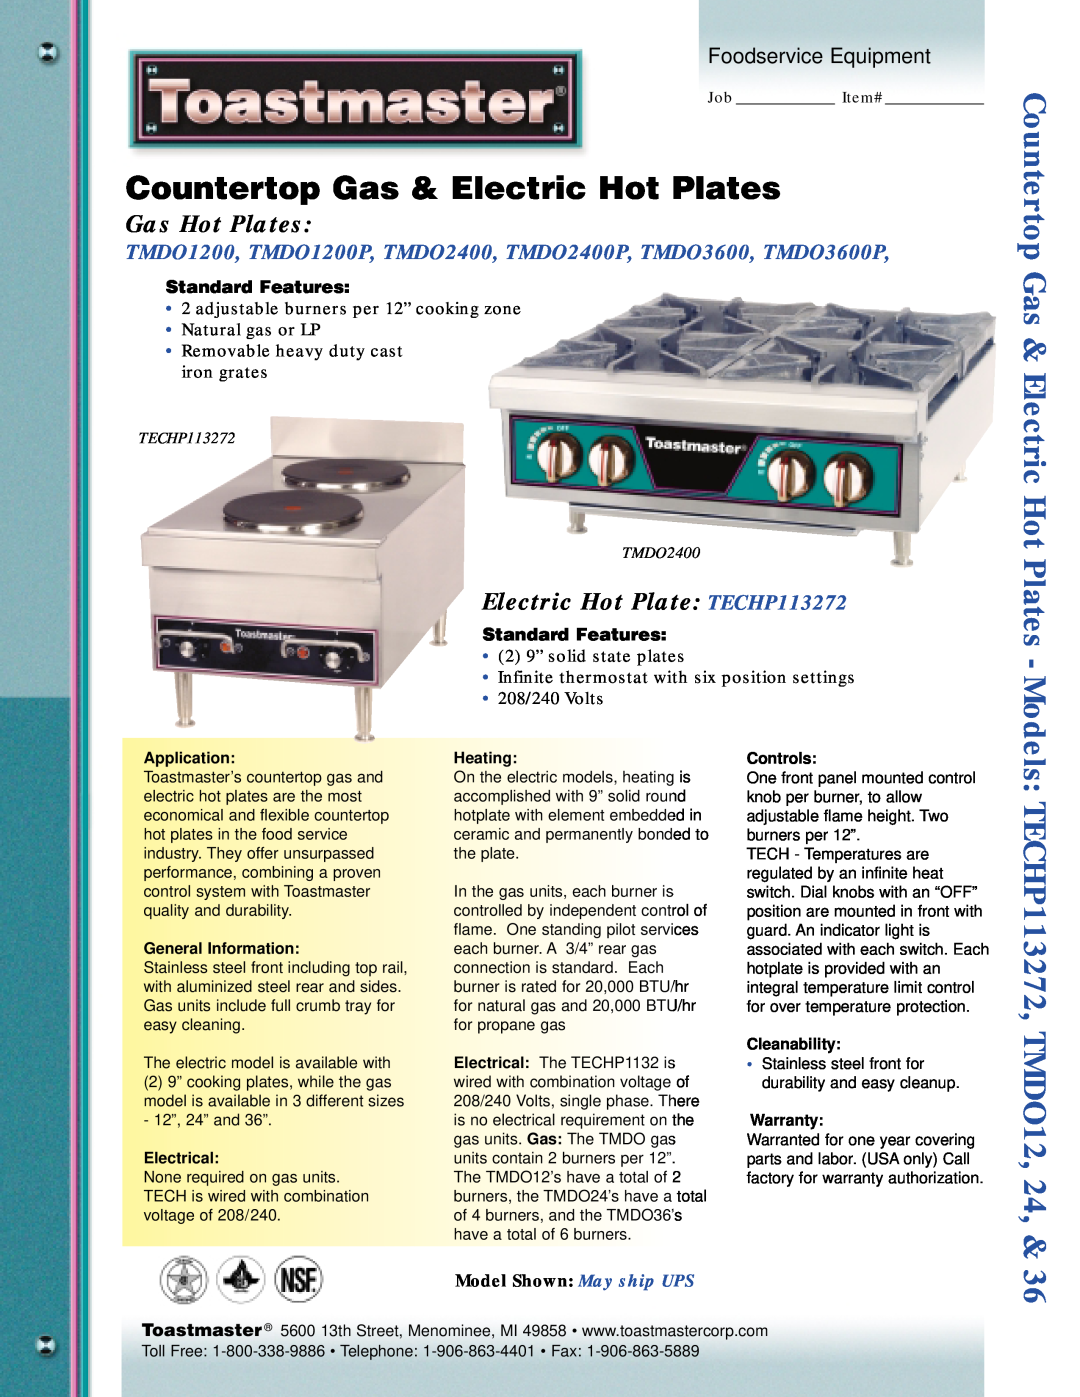 Toastmaster 24 warranty Countertop Gas & Electric Hot Plates, Standard Features, TECHP113272, TMDO12, Gas Hot Plates 